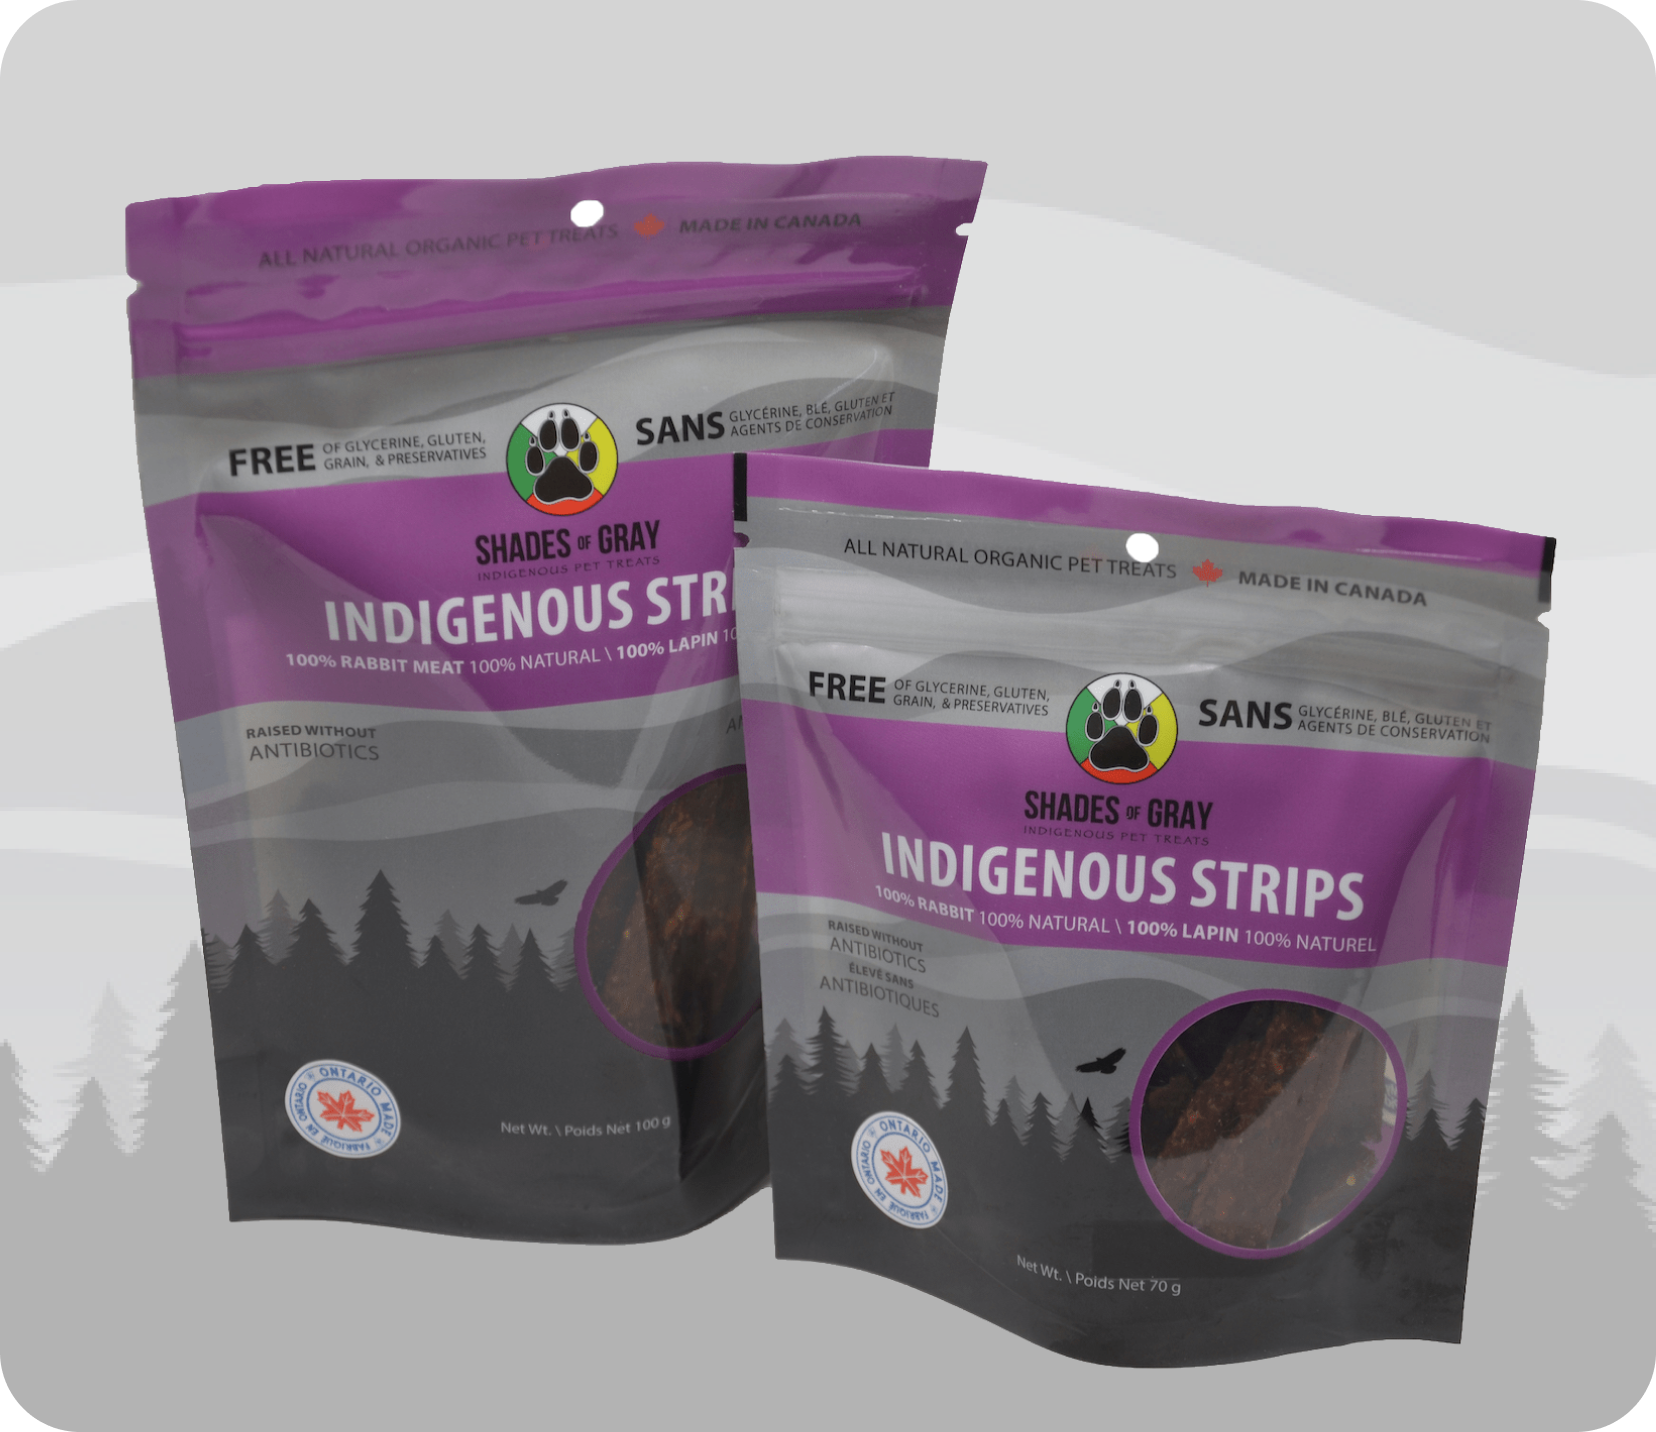 Indigenous Rabbit Strip Pet Treats made with organic all natural 100% Rabbit, for your cats and dogs. Free of Glycerine, Gluten, Grain & Preservatives.